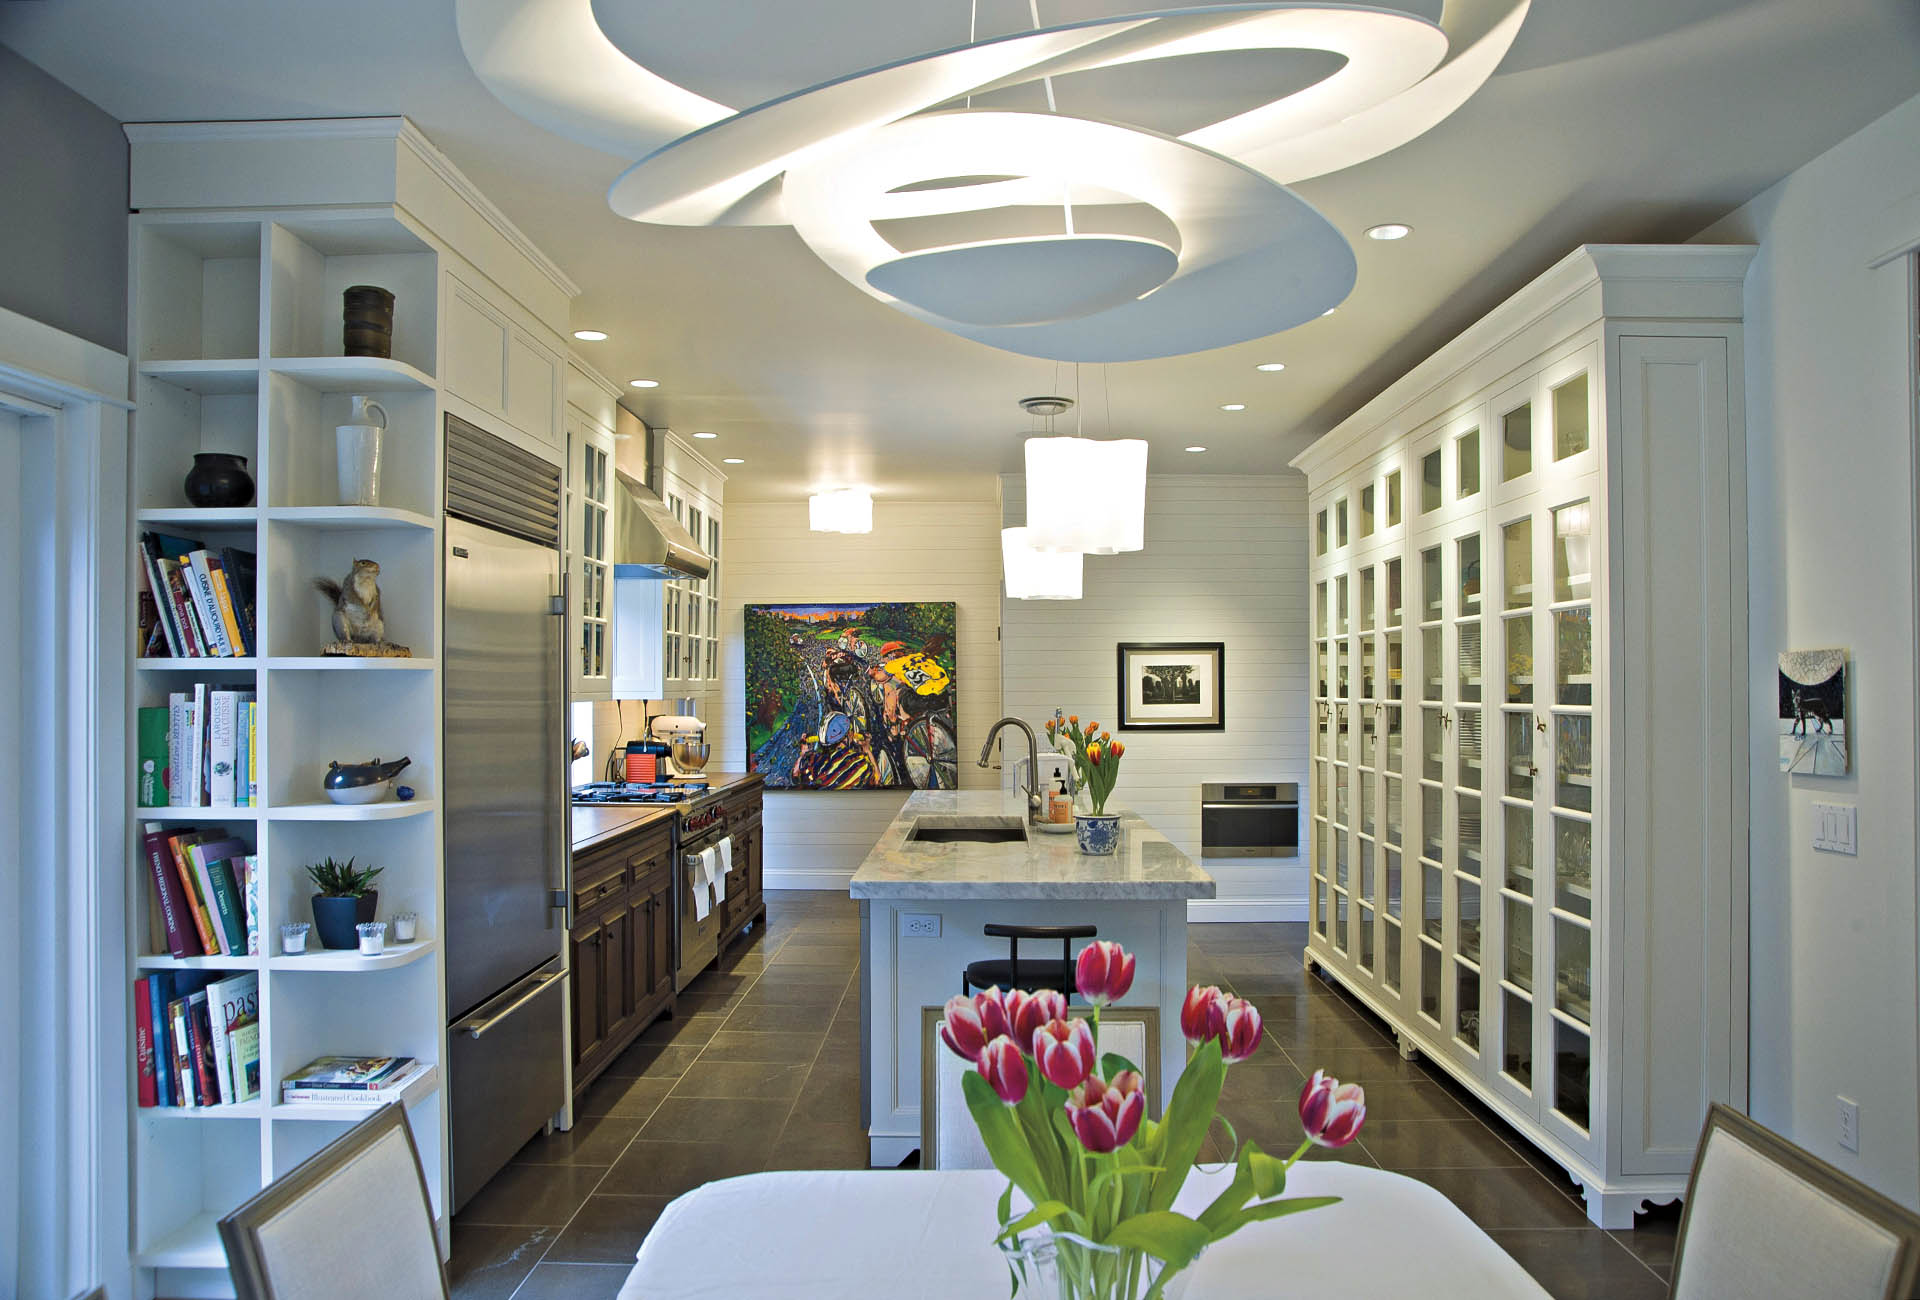 Foley Road white kitchen with Artimede lighting